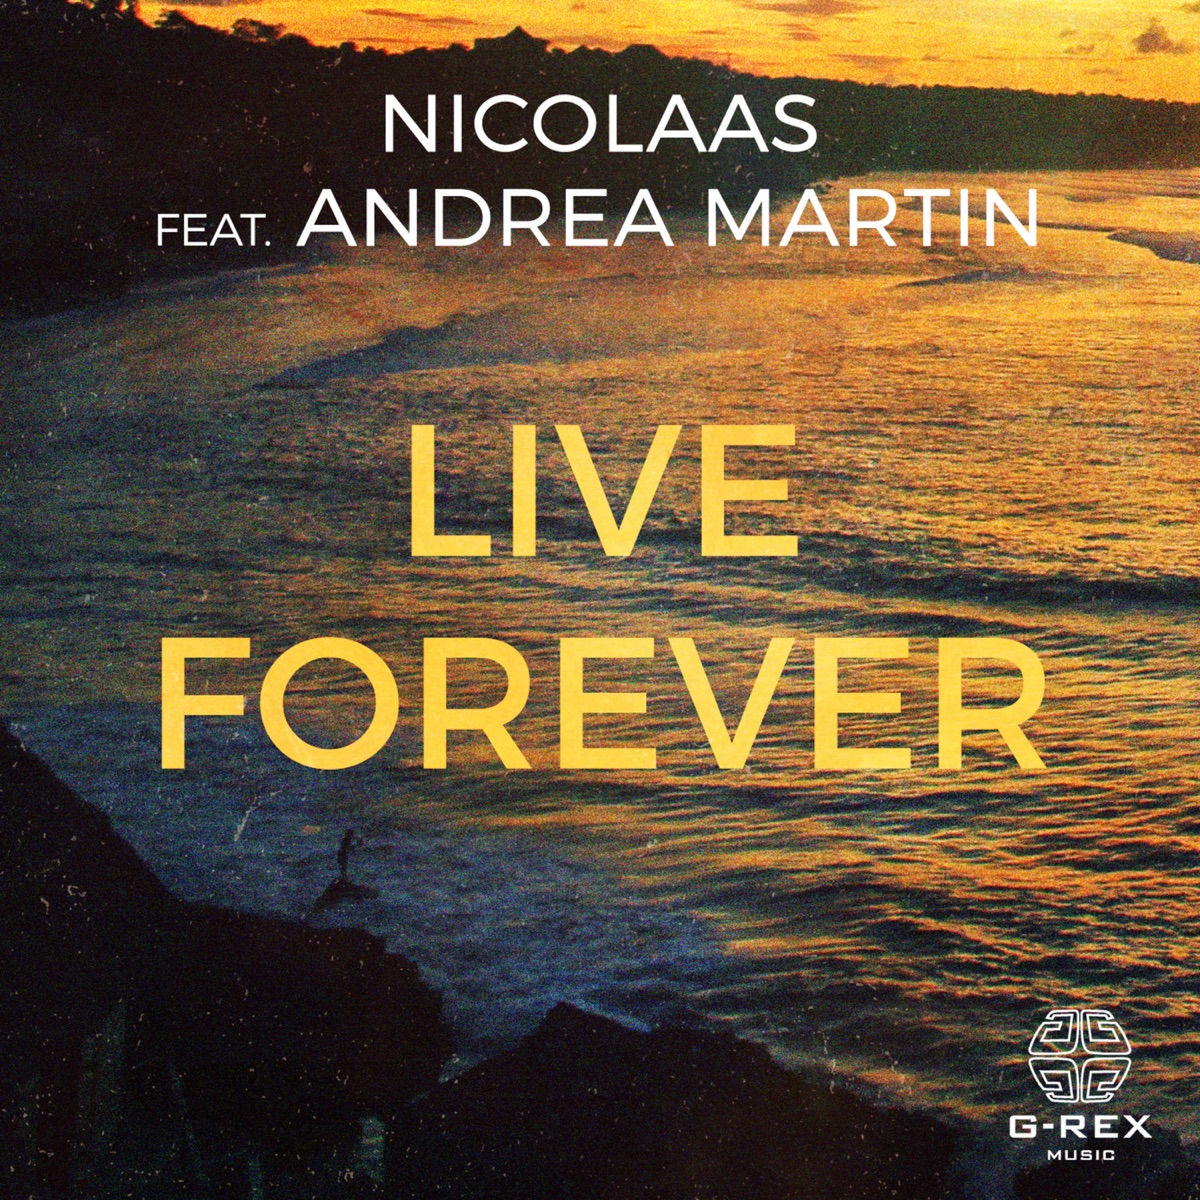 NICOLAAS - Live Forever (feat. Andrea Martin) - Single